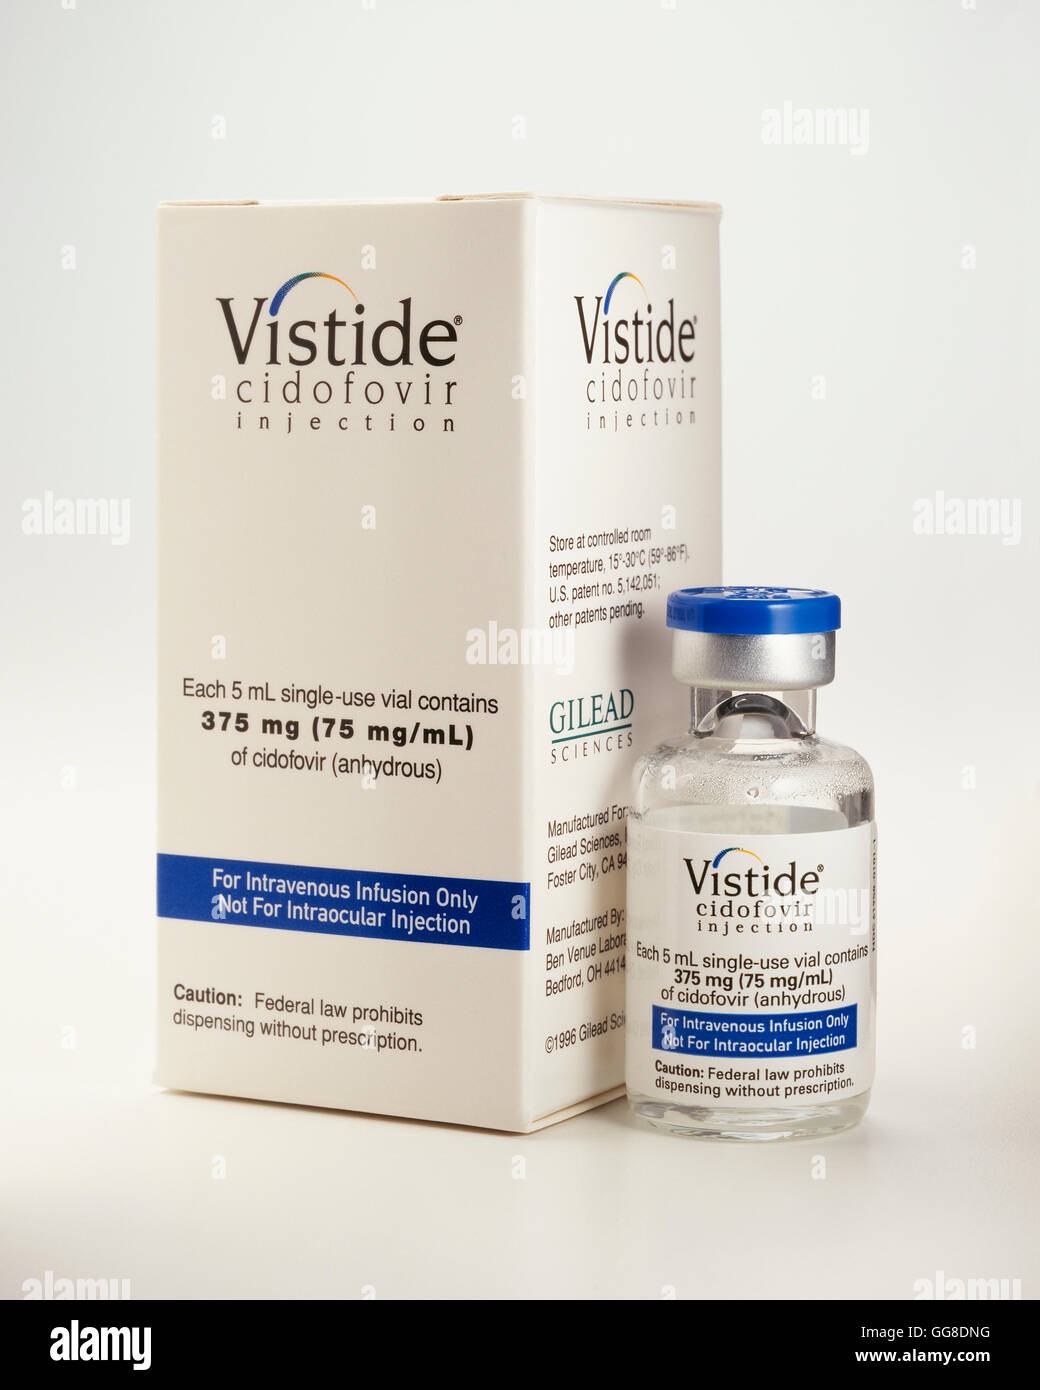 CIDOFOVIR - INJECTION Vistide side effects medical uses and drug interactions